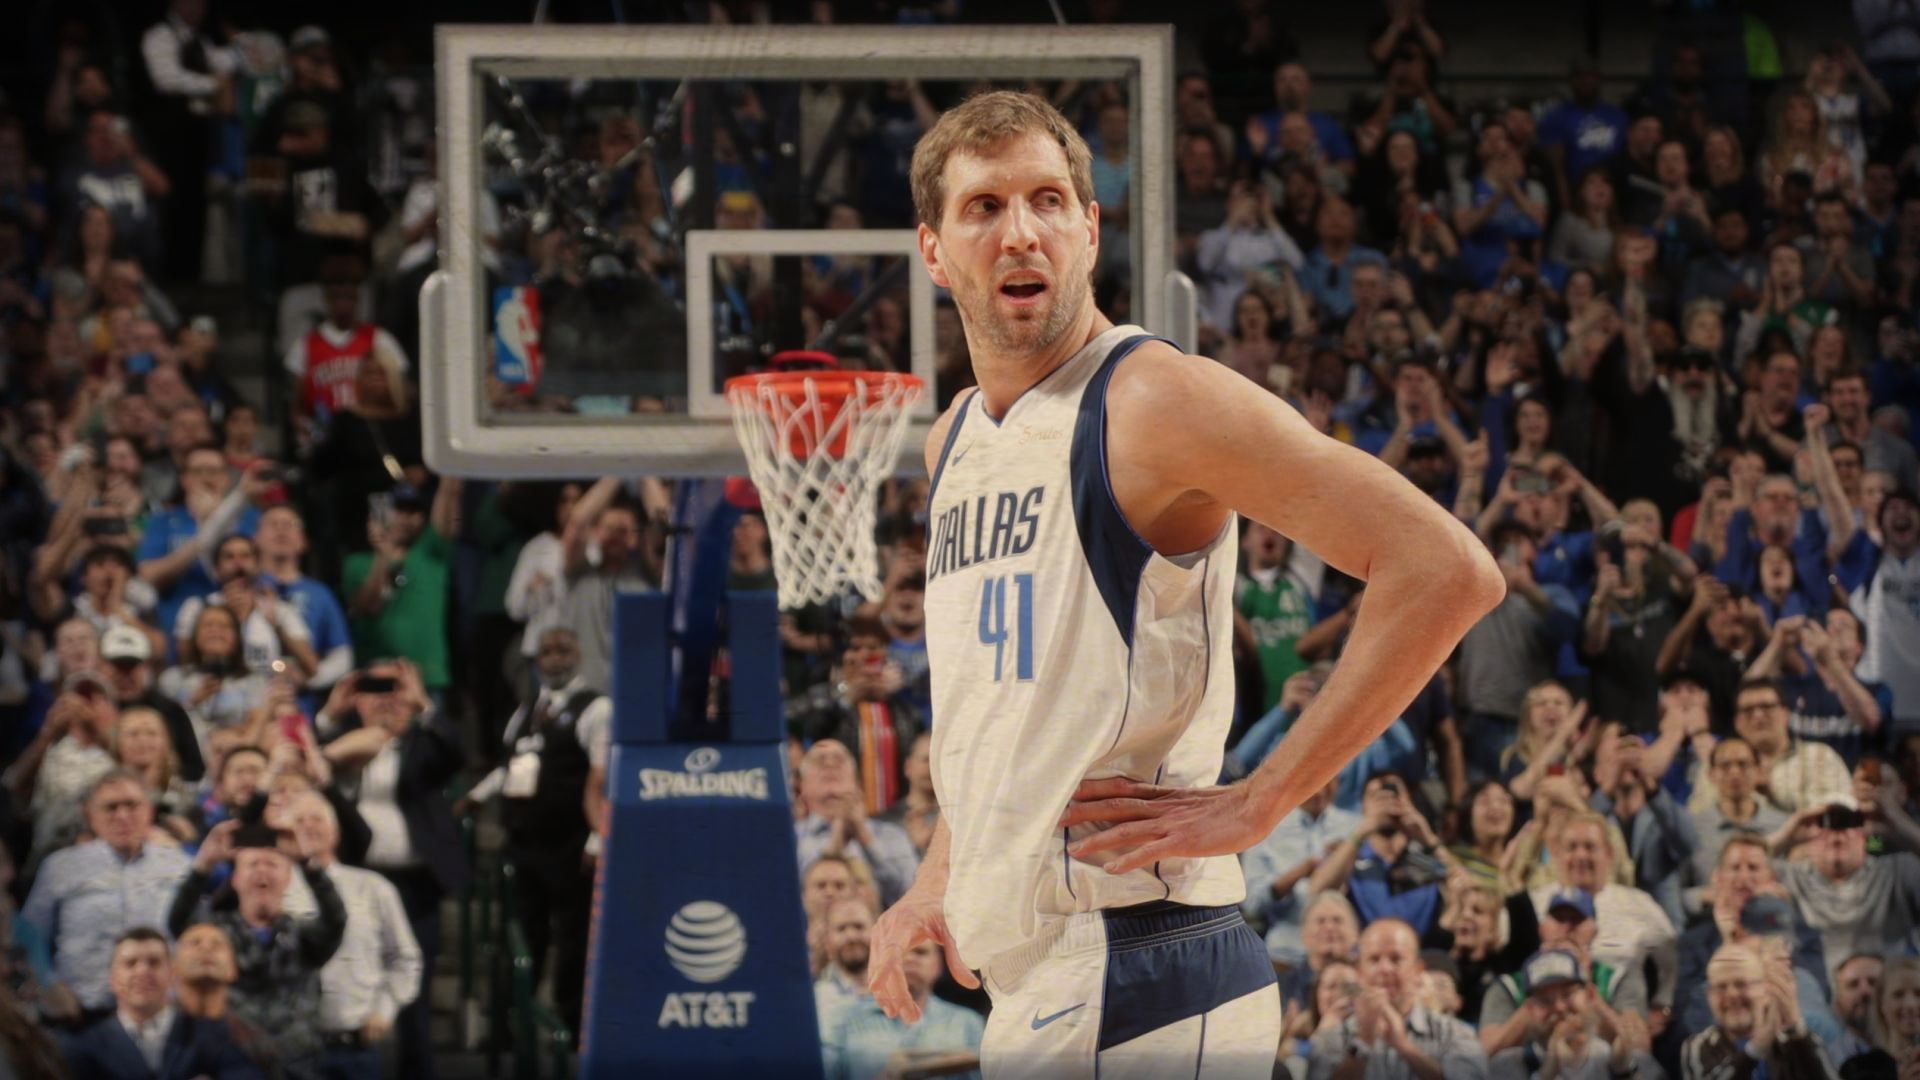 NBA Weekly Wrap: Dirk Passes The Great Wilt, And Porzingis Goes Through Full Practice